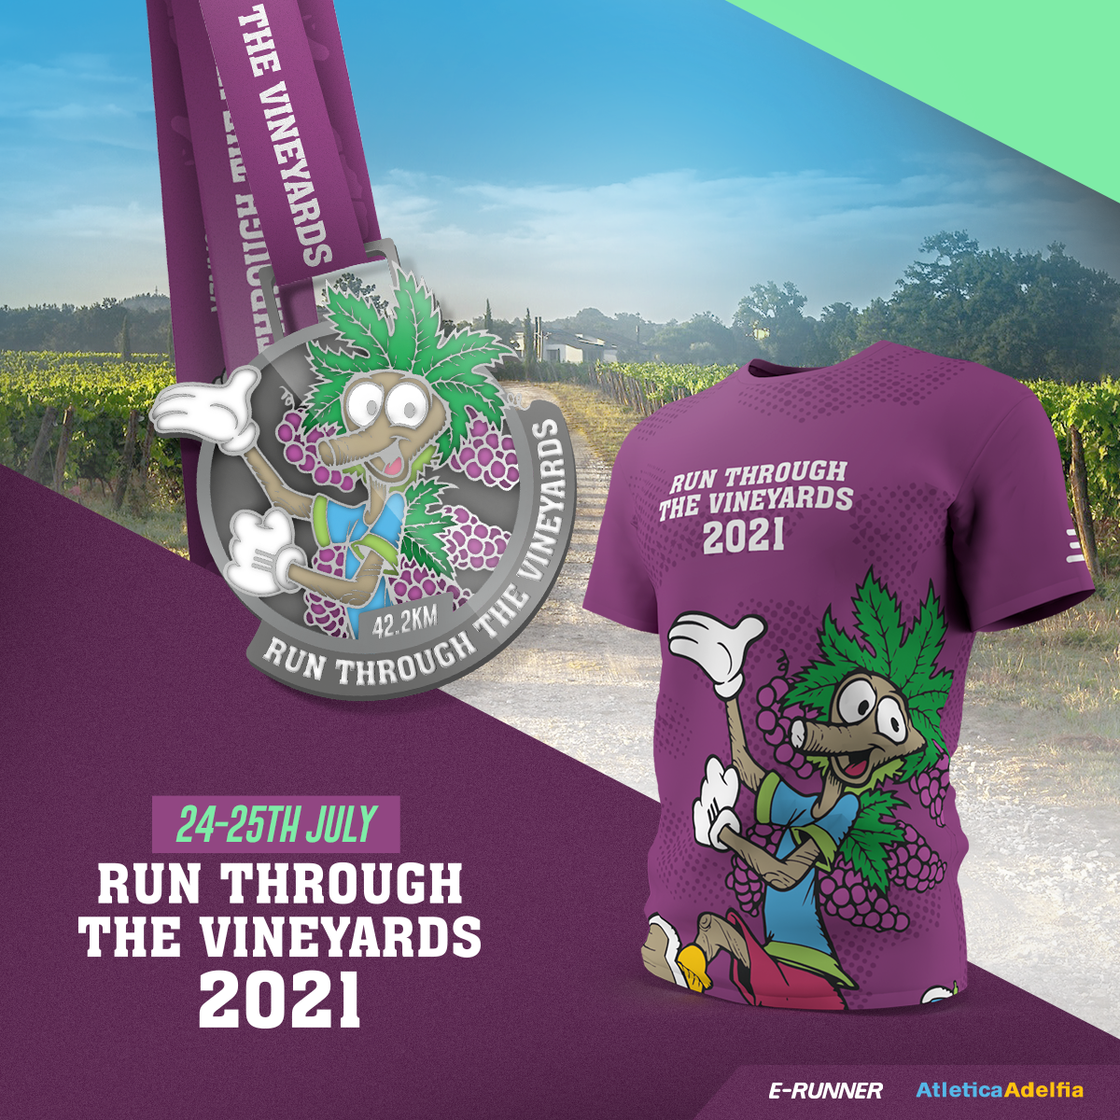 SPECIAL OFFER: Stunning Medal + Official T-Shirt | RUN THROUGH THE VINEYARDS 2021 | July 24-25th